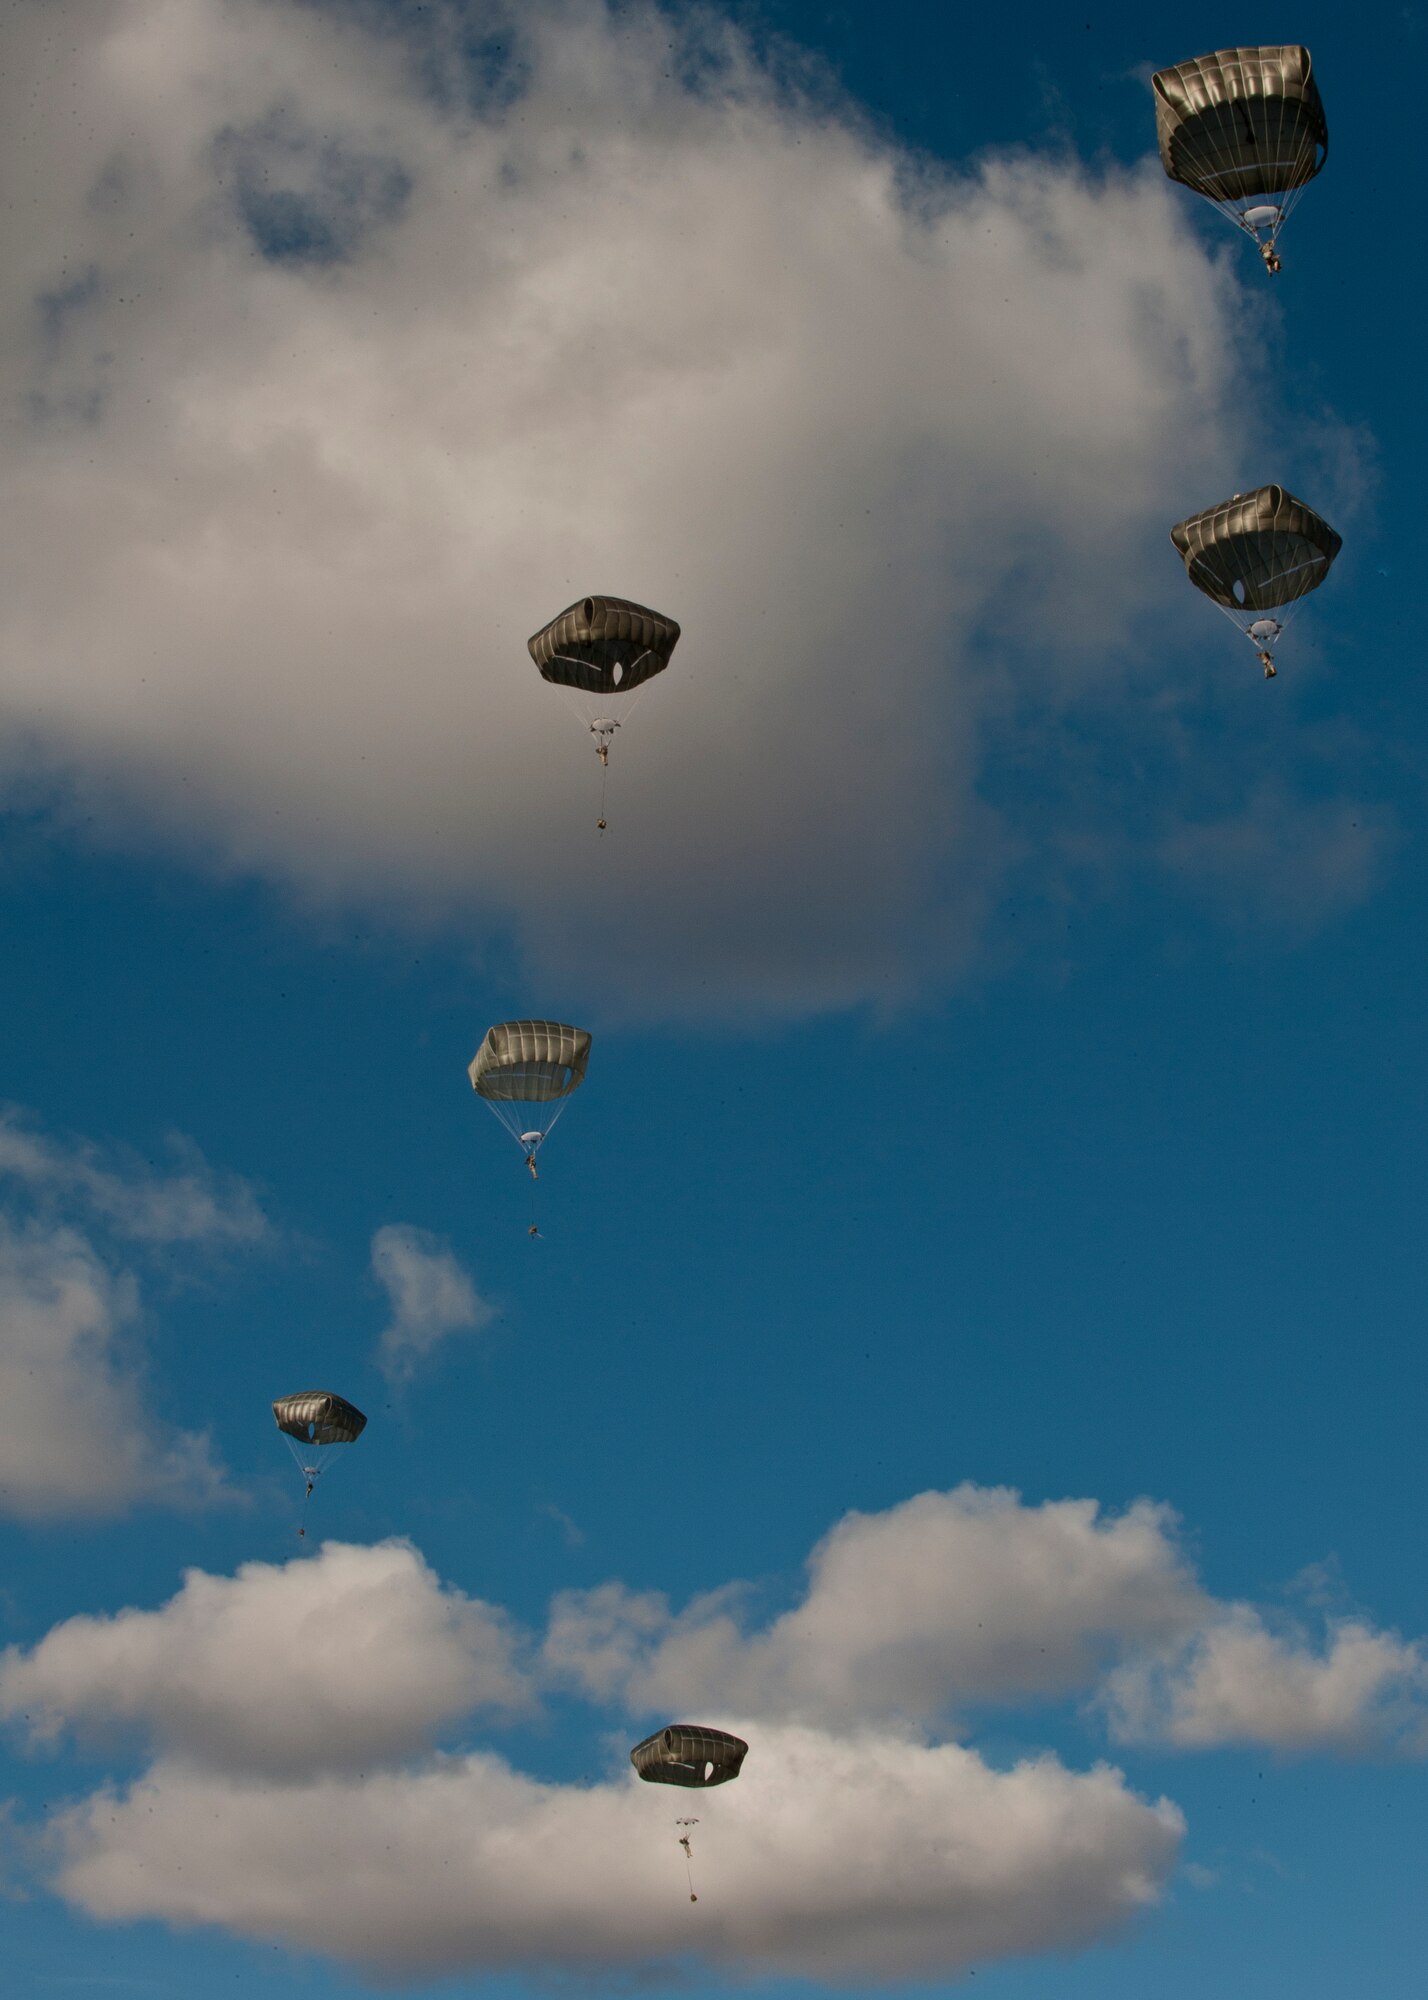 Paratroopers assigned to the 3rd Brigade Combat Team, 82nd Airborne Division, Fort Bragg, N.C., glide to their drop zone during the U.S. Air Force Weapons School's Joint Forcible Entry Exercise 14B on the Nevada Test and Training Range Dec. 6, 2014. JFEX, as part of a restructured integration phase in the USAFWS, is a prime example of the training students get to synchronize aircraft movements from geographically separated bases, command large formations of dissimilar aircraft in high-threat airspace, and tactically deliver and recover combat forces via air drops and combat landings on an unimproved landing strip. (U.S. Air Force photo by Staff Sgt. Victoria Sneed)